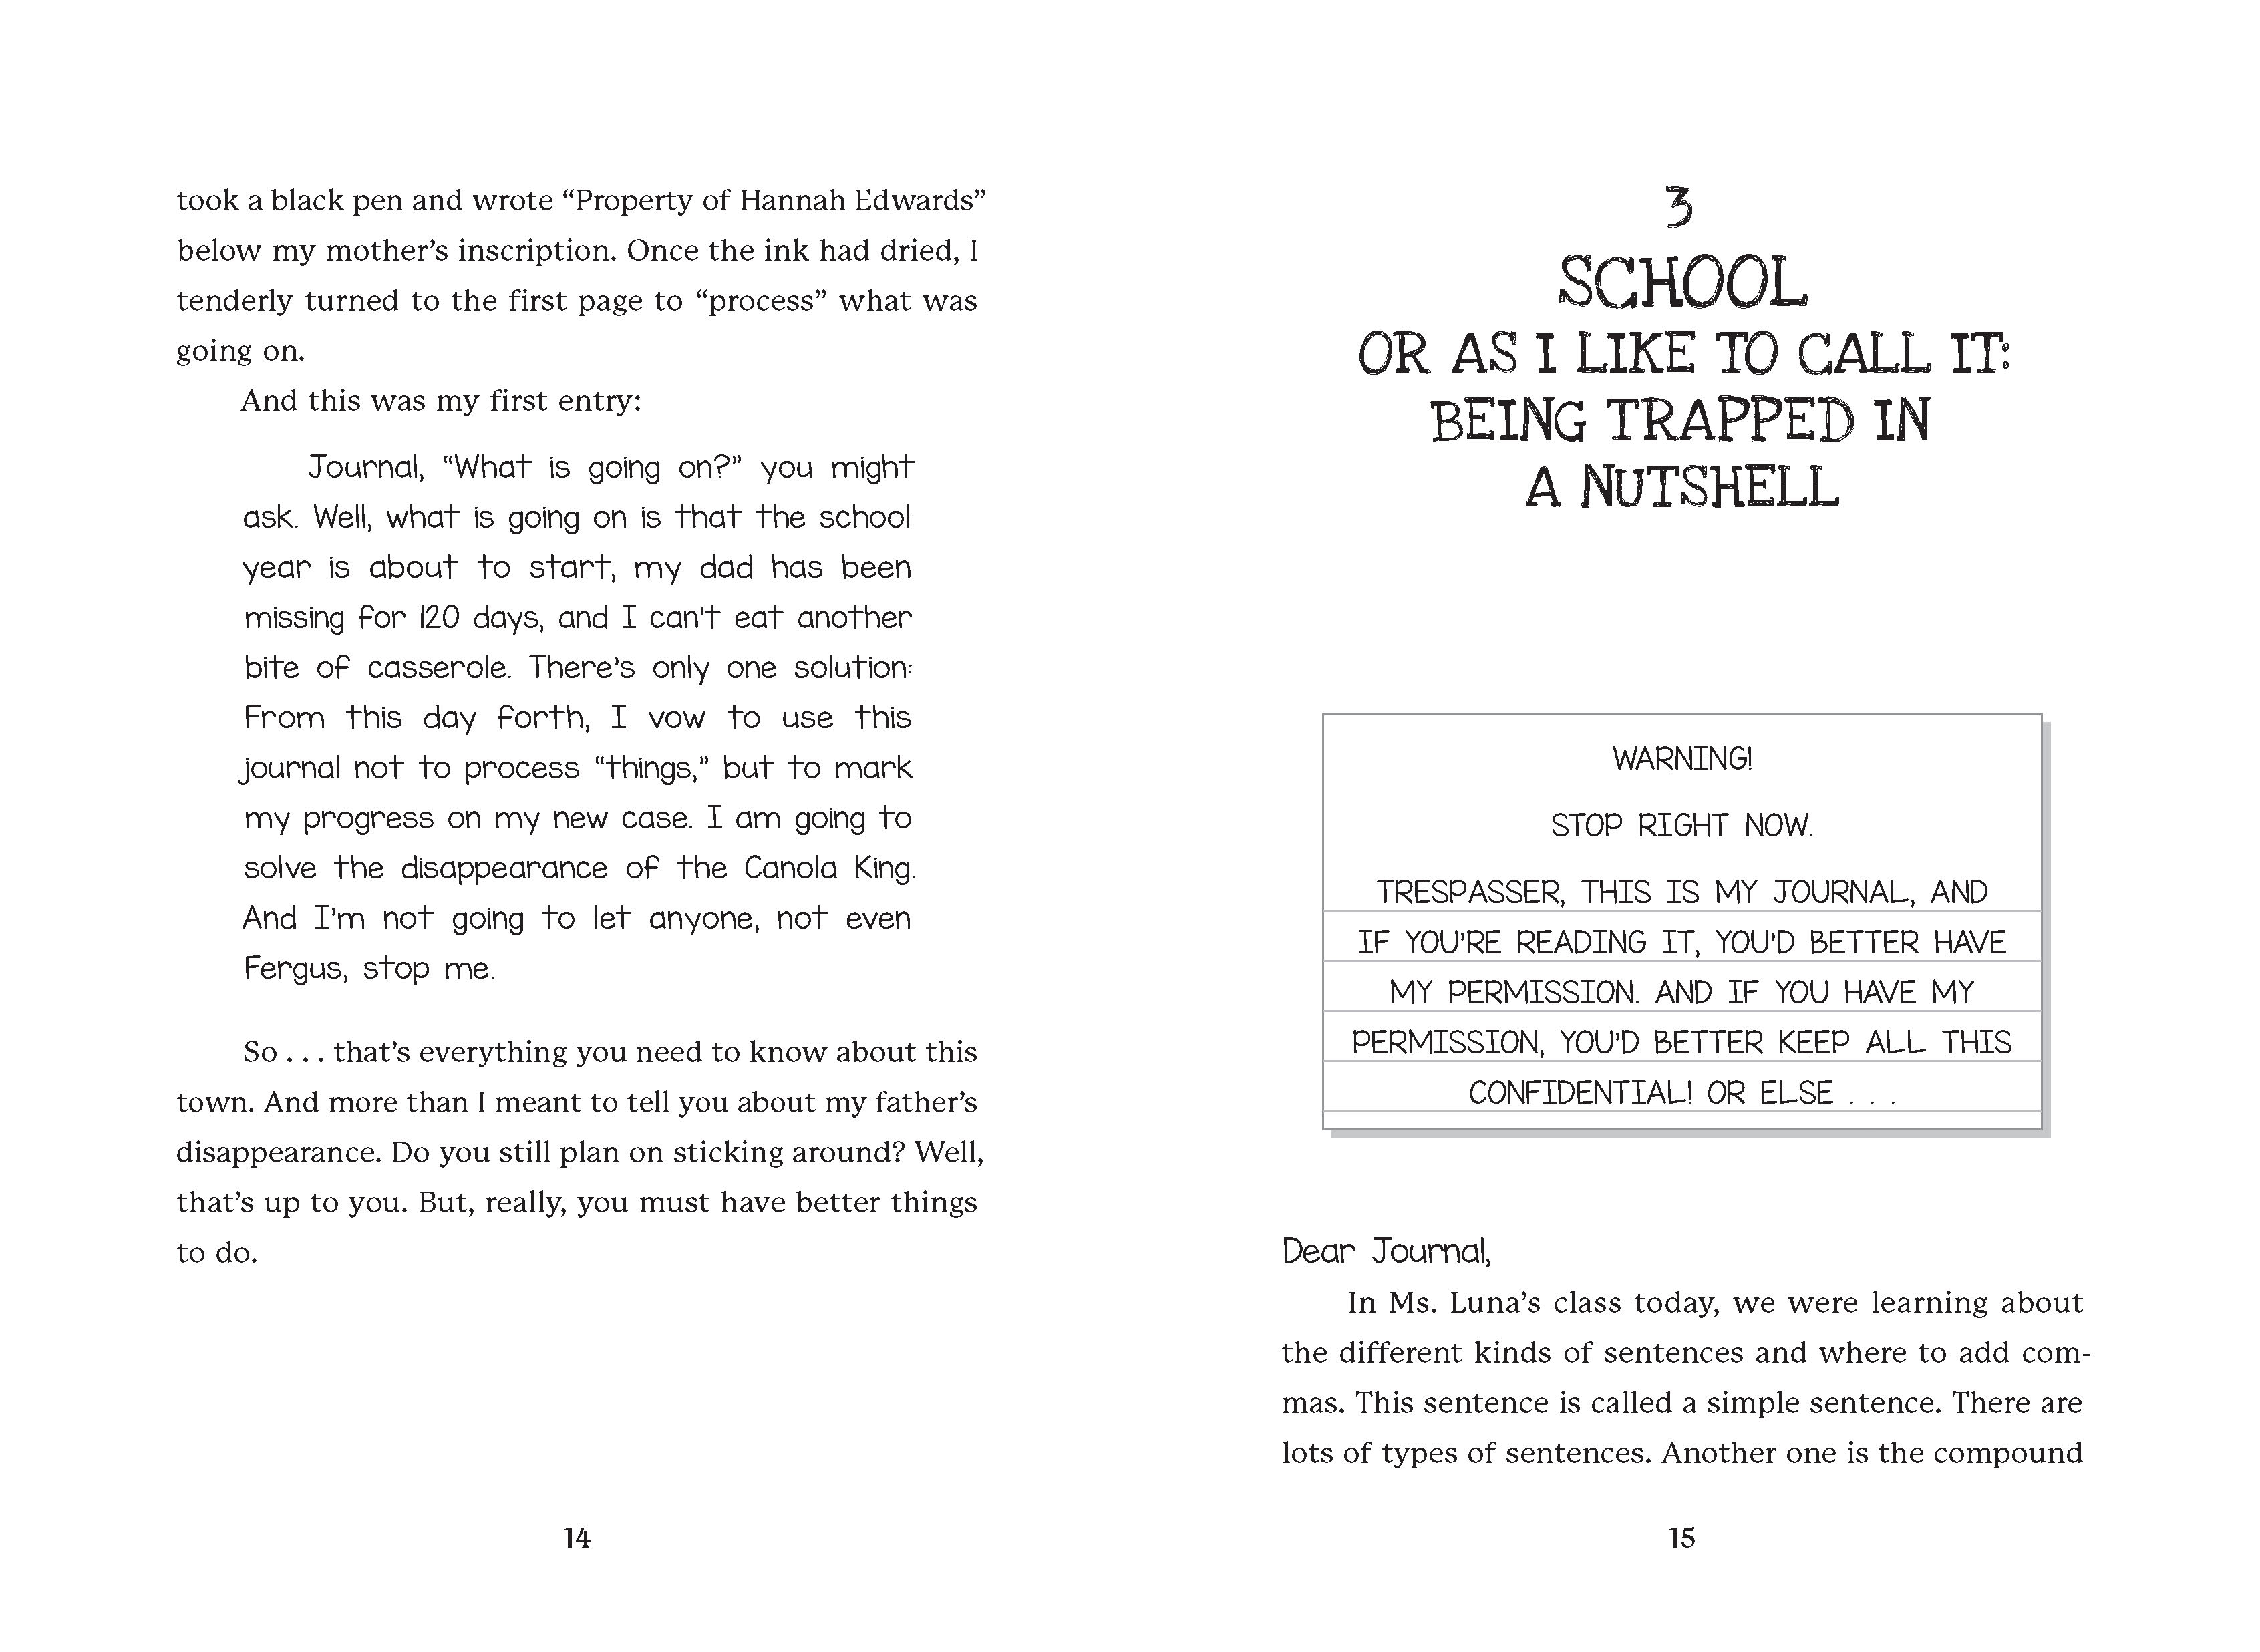 Sample spread of Hannah Edwards Secrets of Riverway from the start of Chapter 3, pages 14 and 15